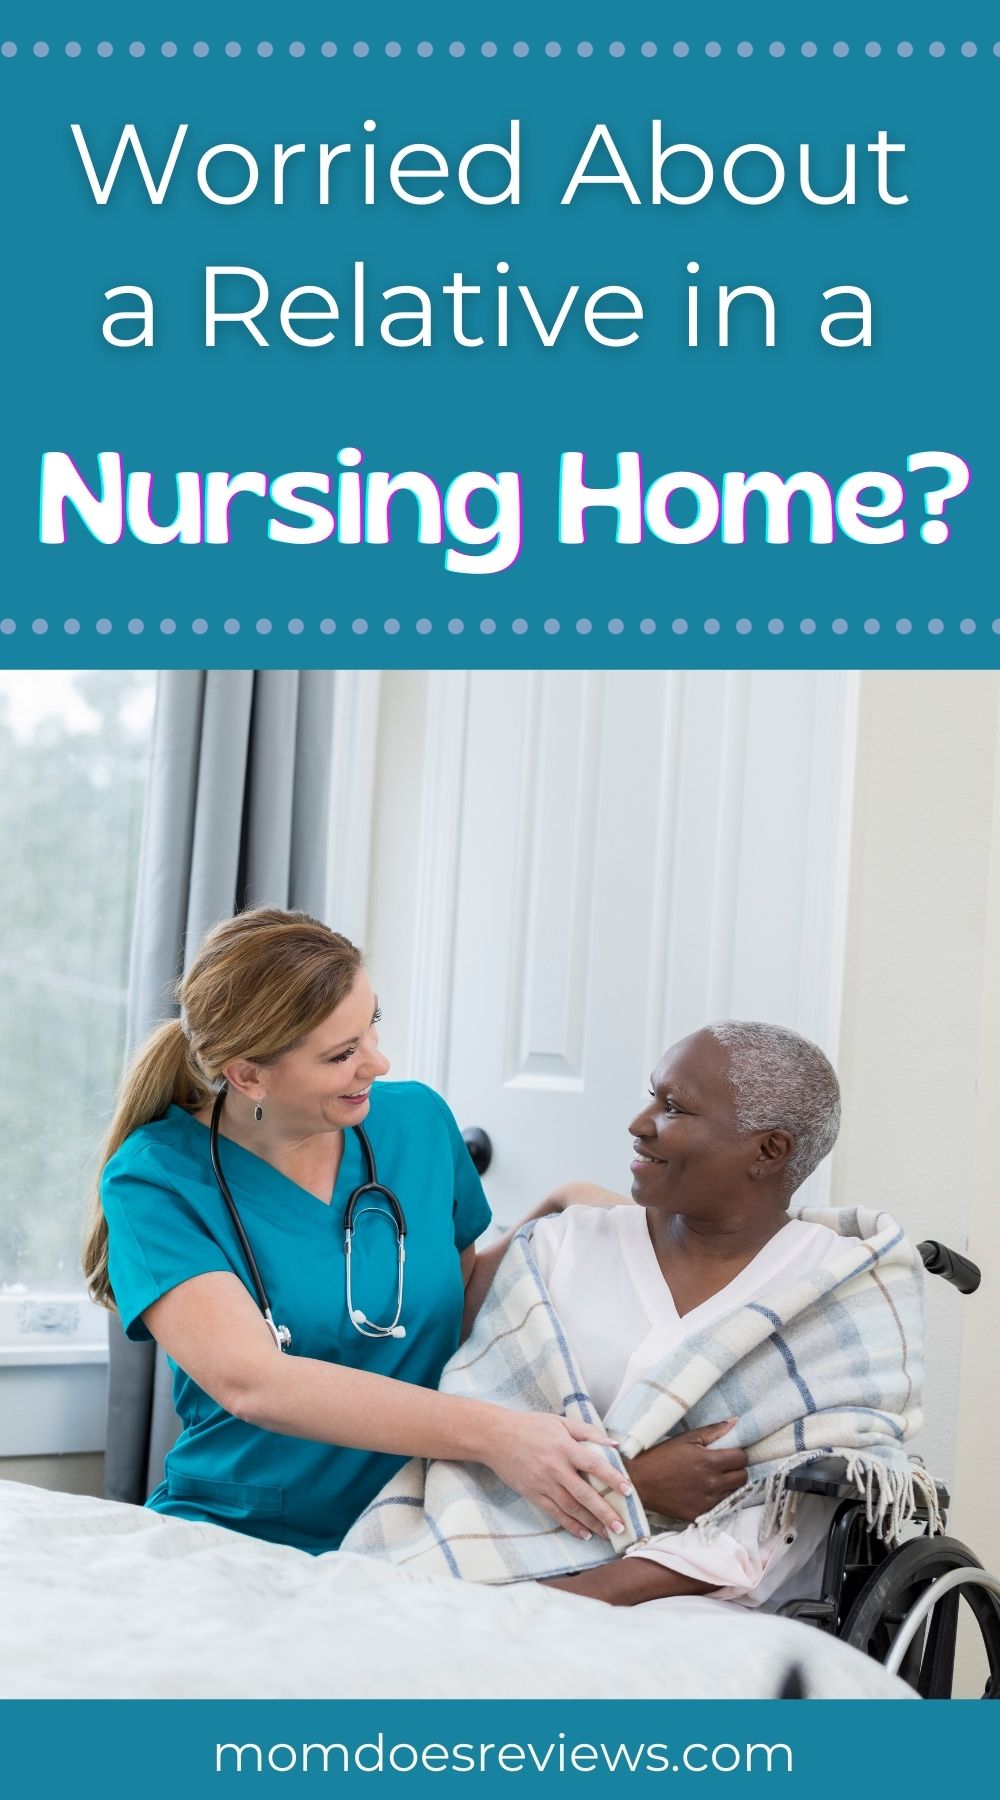 Worried About a Relative in a Nursing Home?